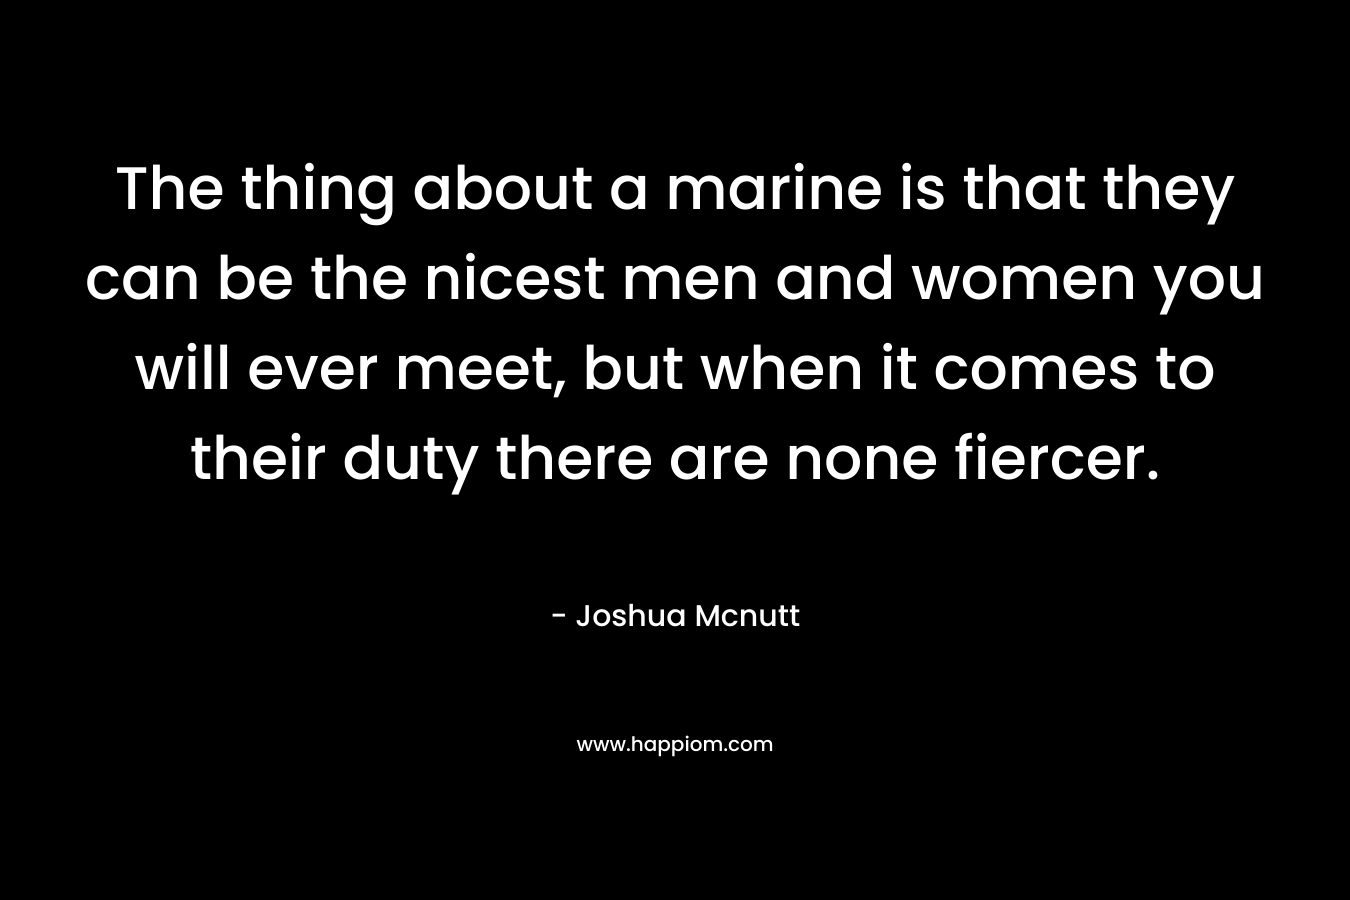 The thing about a marine is that they can be the nicest men and women you will ever meet, but when it comes to their duty there are none fiercer. – Joshua Mcnutt